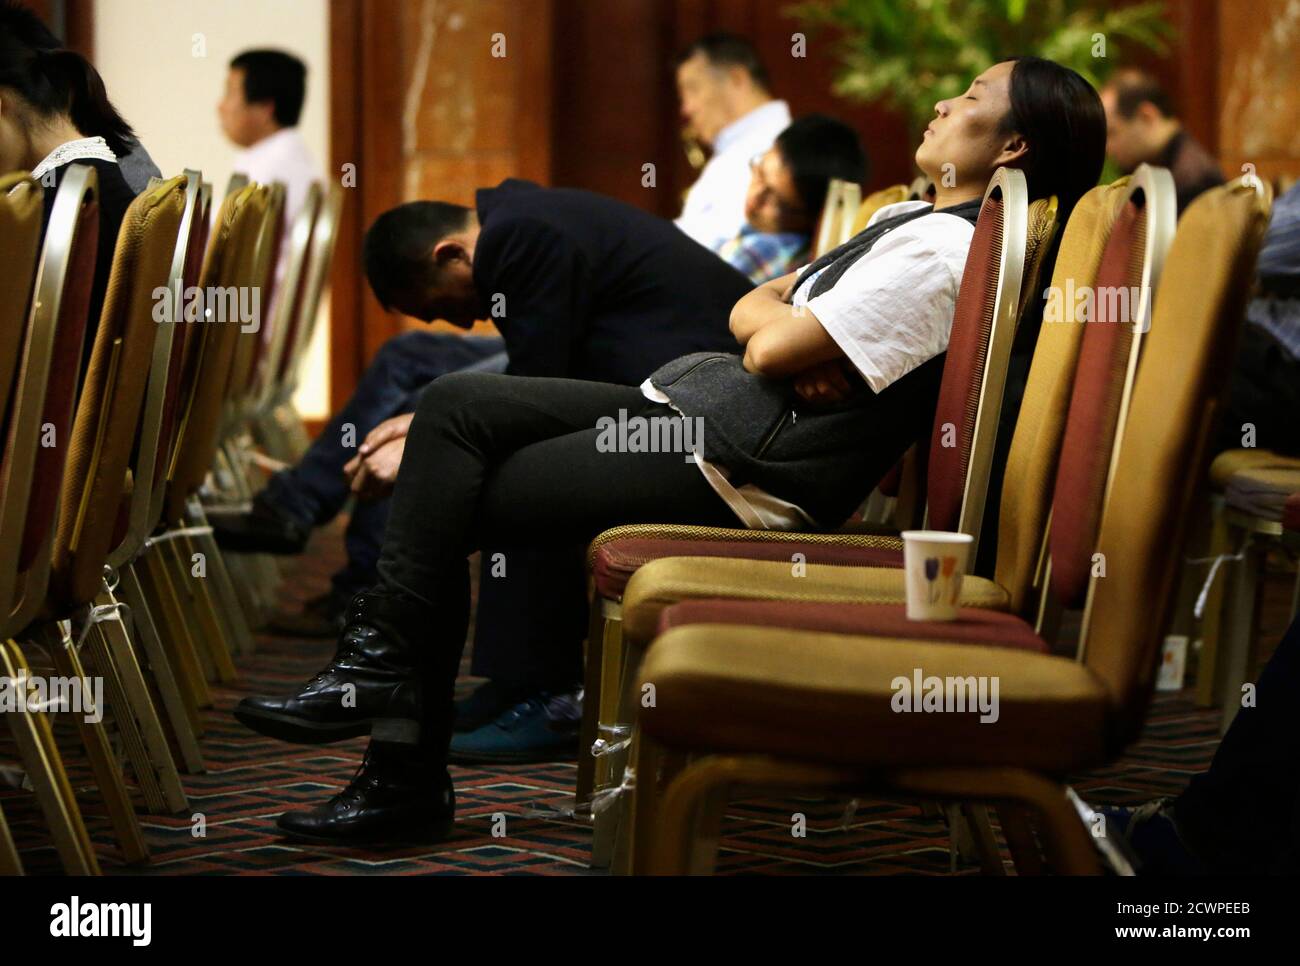 Relatives of passengers on board Malaysia Airlines Flight MH370 wait for a daily briefing at Lido Hotel, in Beijing April 3, 2014. Malaysia's prime minister visited the Australian search base for missing Flight MH370 on Thursday as a nuclear-powered submarine joined the near-four week hunt that has so far failed to find any sign of the missing airliner and the 239 people on board. REUTERS/Jason Lee (CHINA - Tags: TRANSPORT DISASTER) Stock Photo